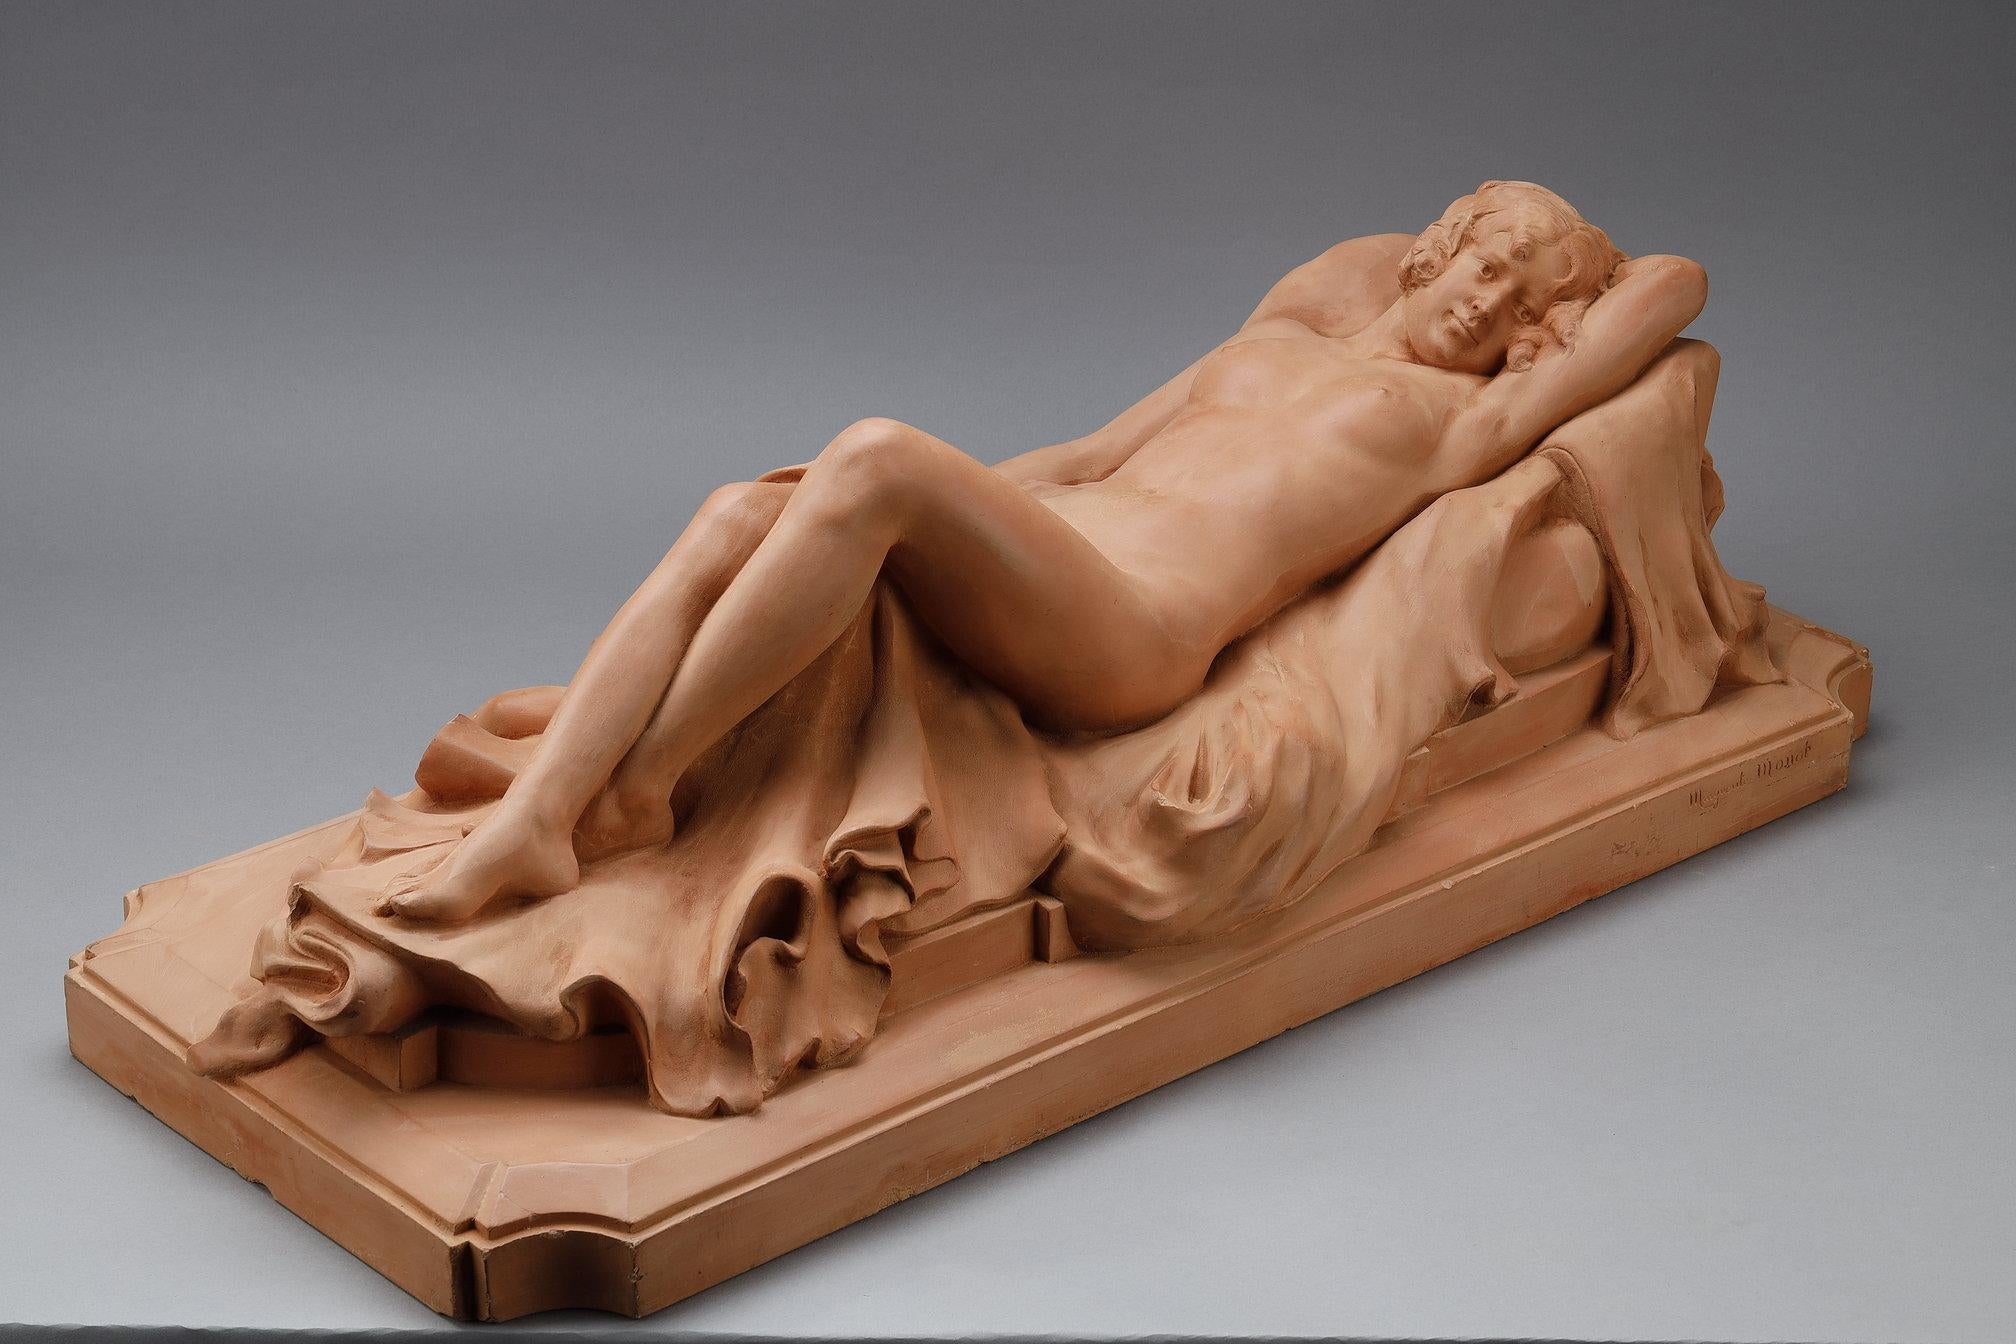 Large terracotta sculpture depicting an Odalisque reclining on a drape For Sale 1